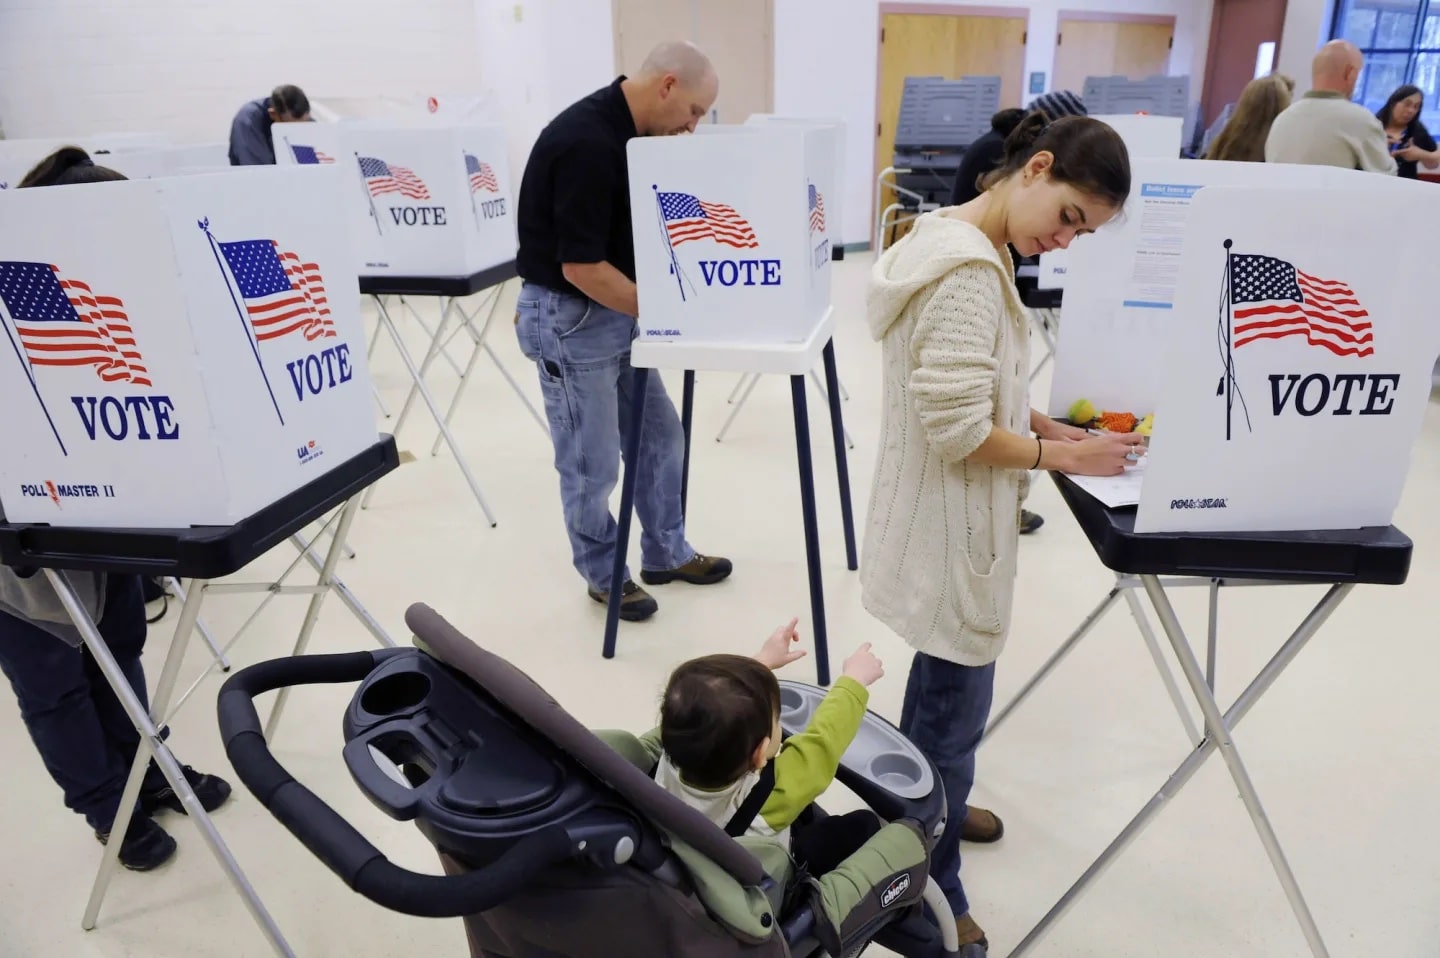 mom casting her vote with child in stroller next to her - can you bring your child to vote